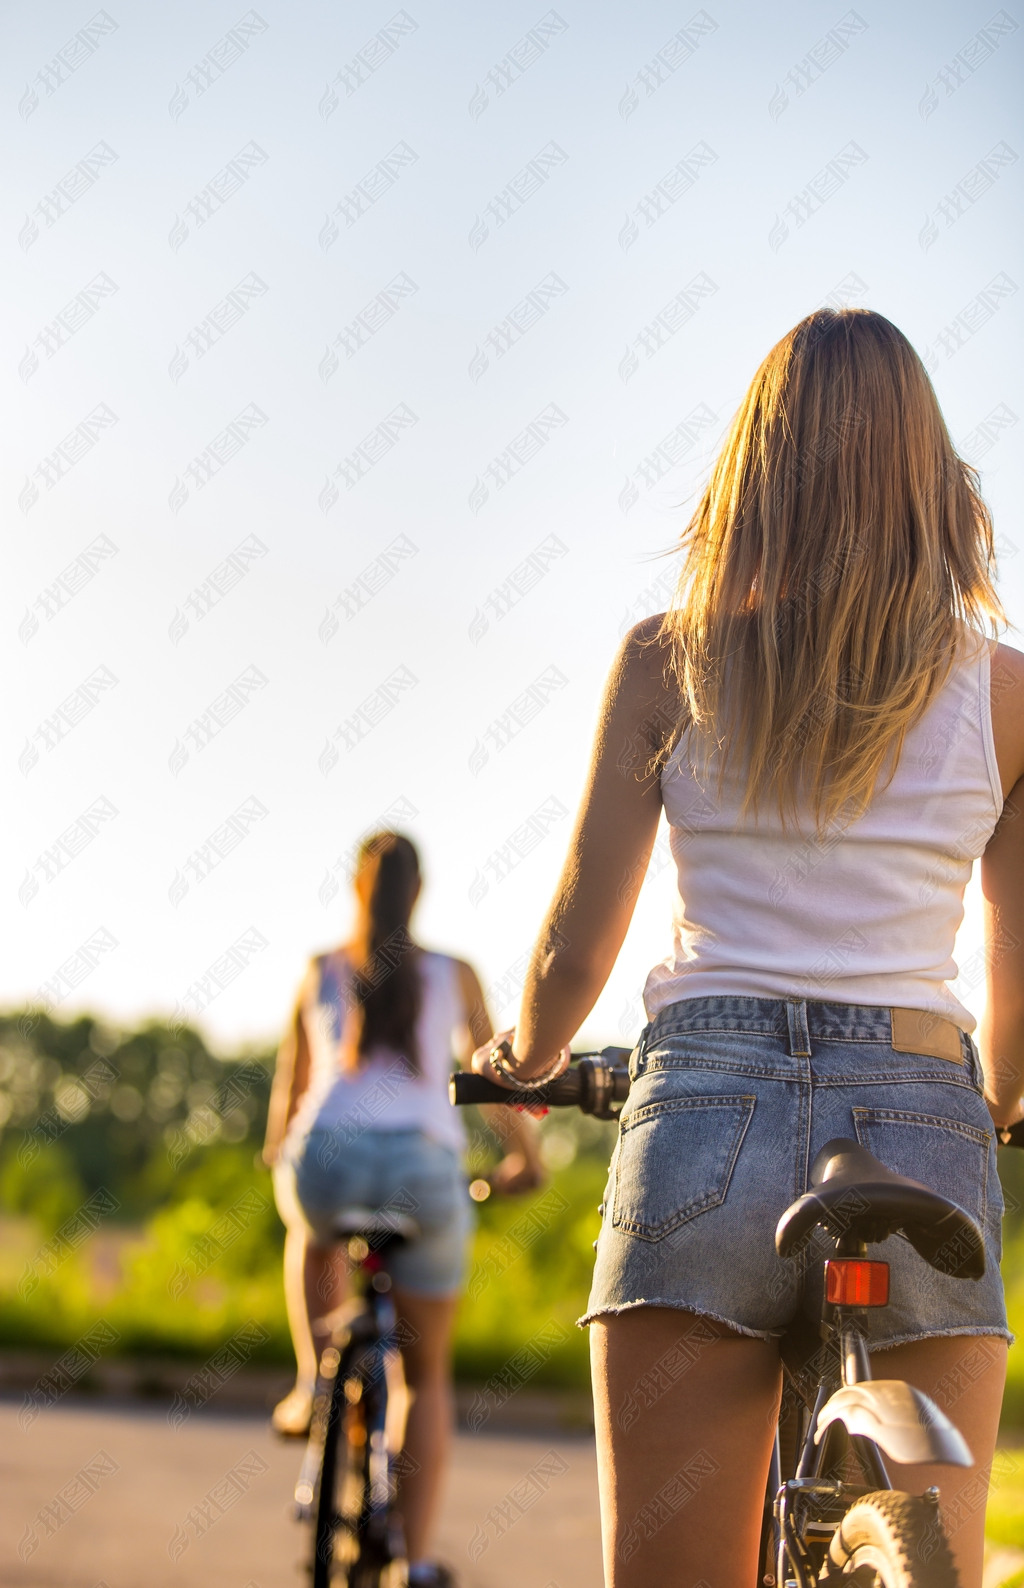 Young women on bikes, rear view